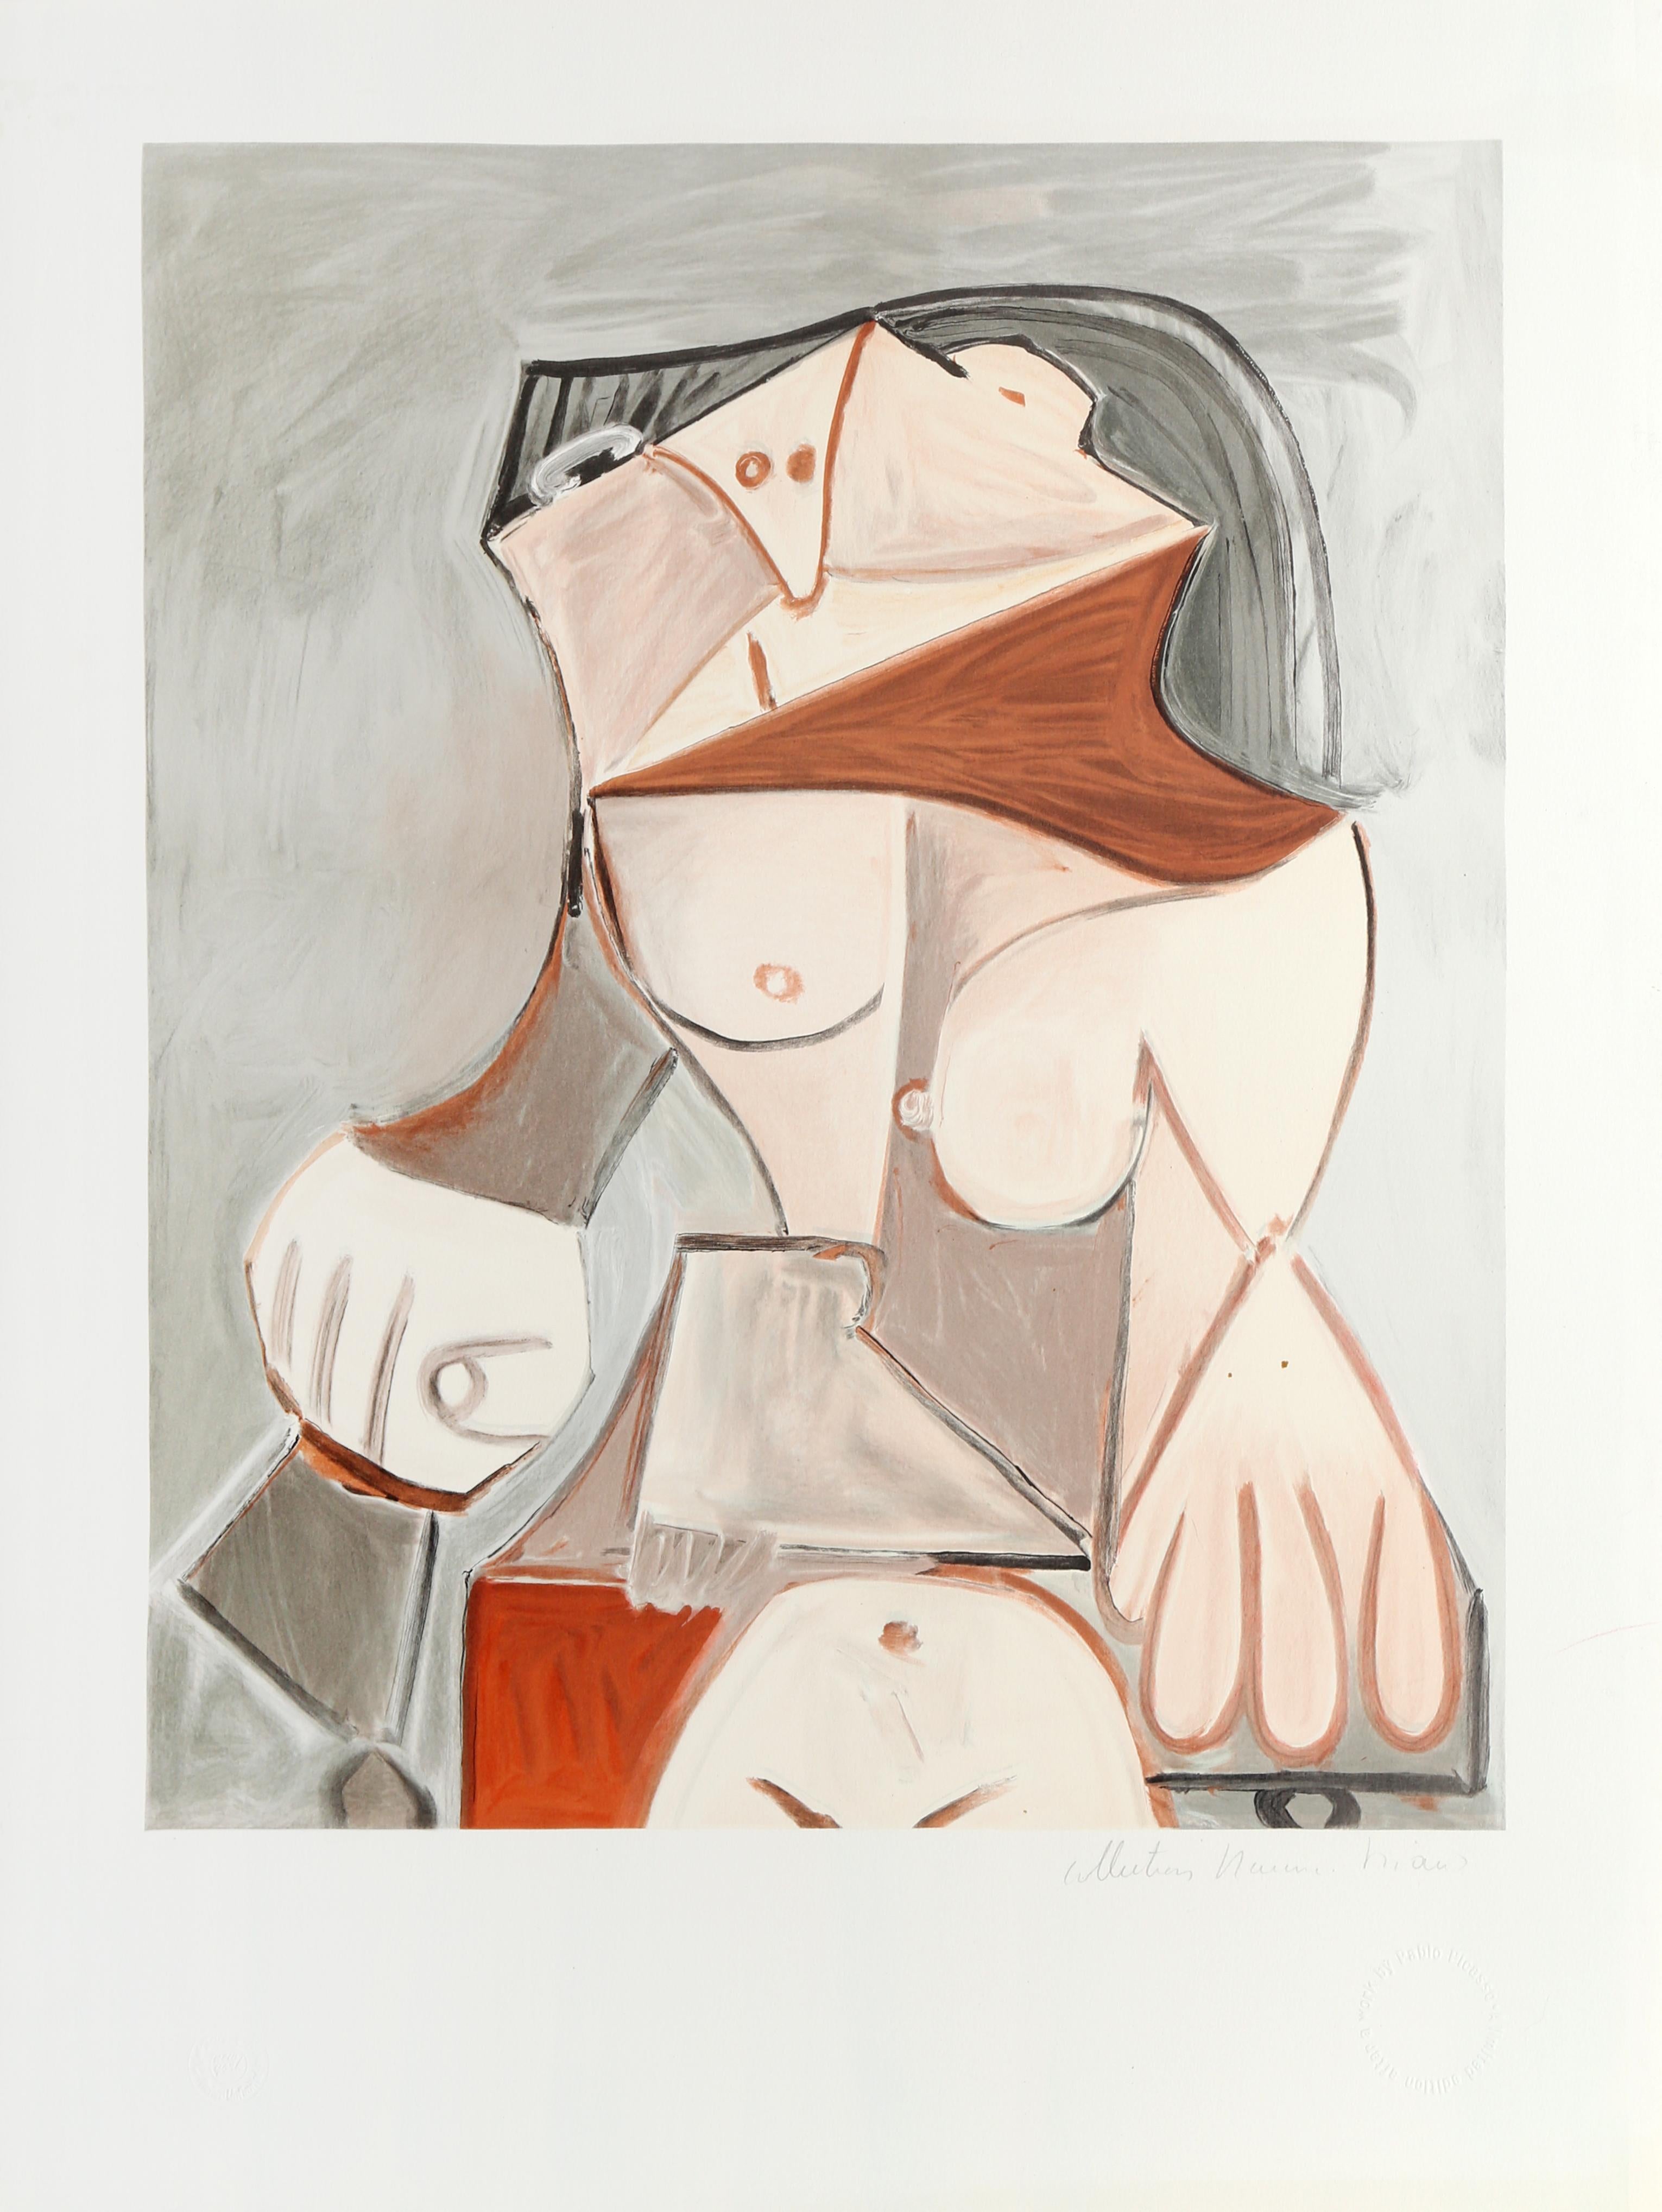 Reclining into an armchair, the nude woman in this print appears fragmented and reduced to angular shapes. While recognizable, the figure of the woman is seen through multiple perspectives and is represented in a more abstracted manner as a result.